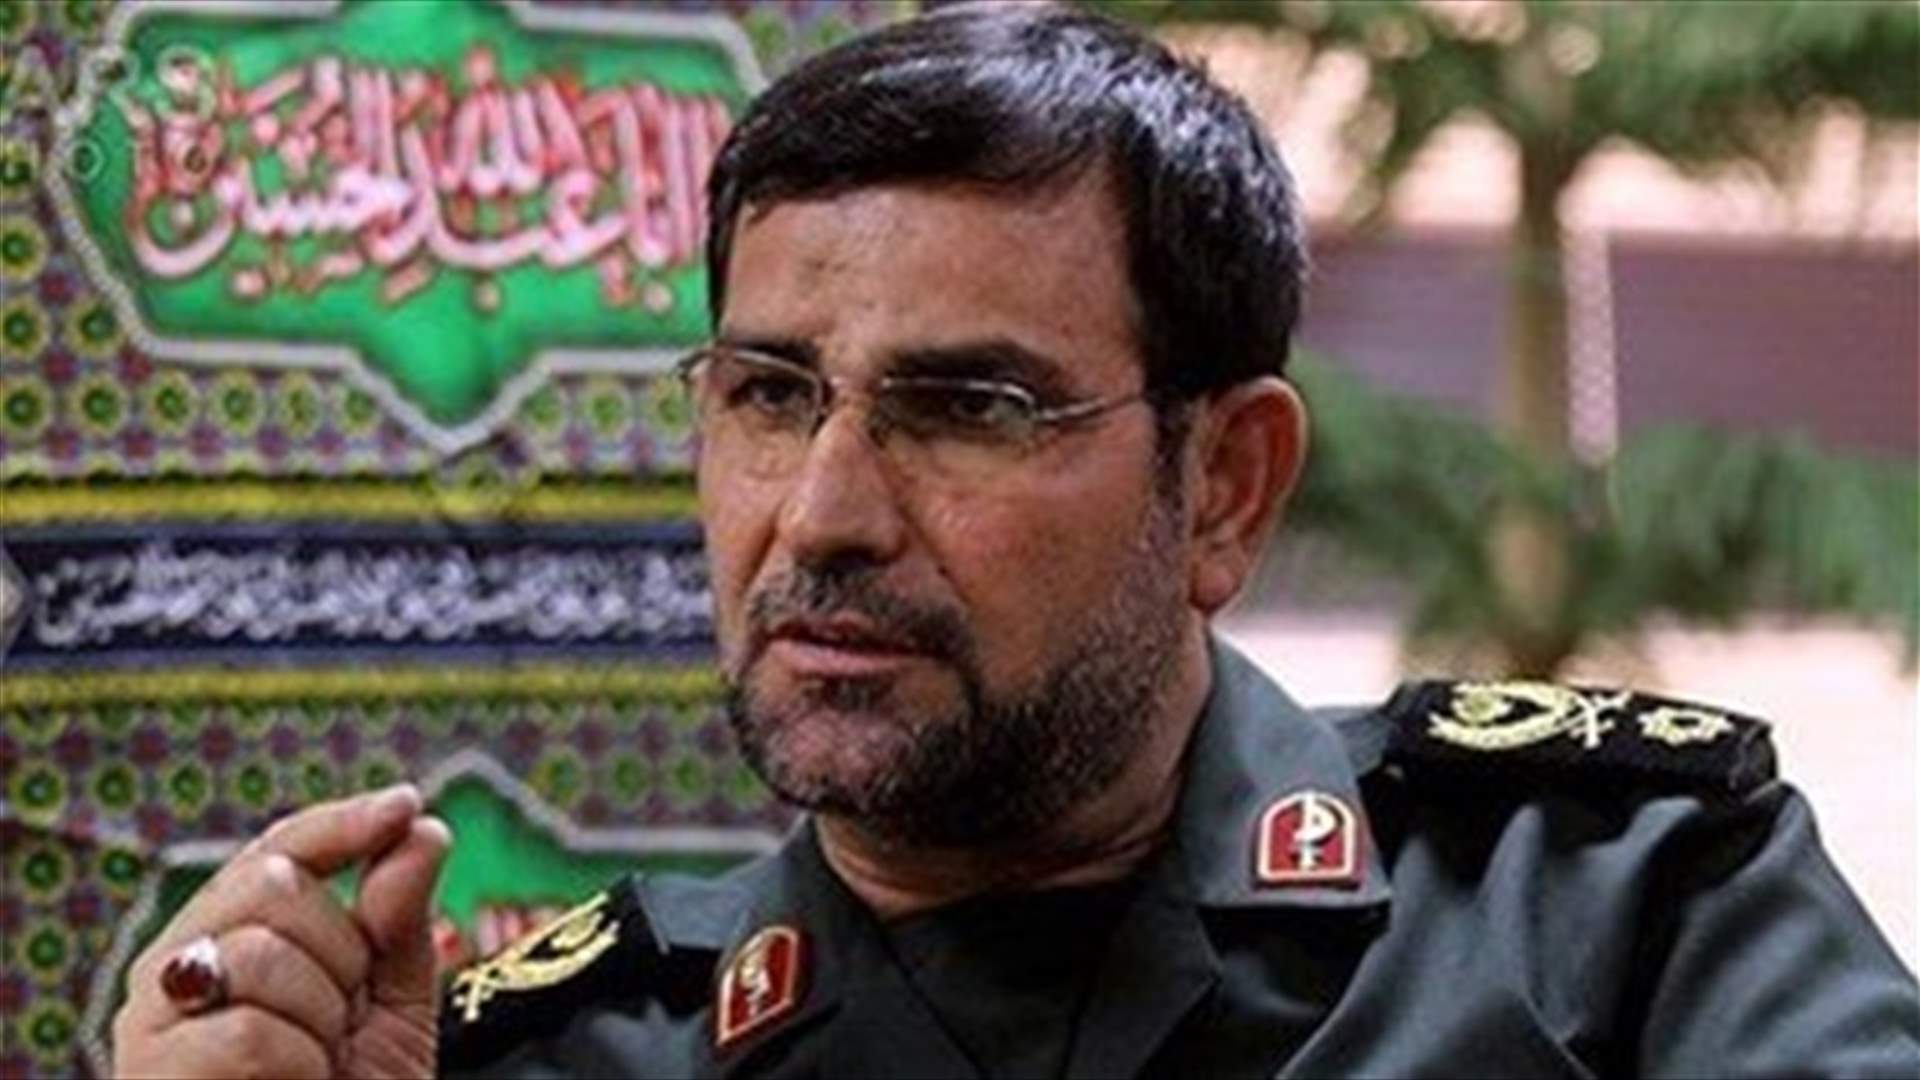 US and UK presence in Gulf brings insecurity -Iran Revolutionary Guards navy chief